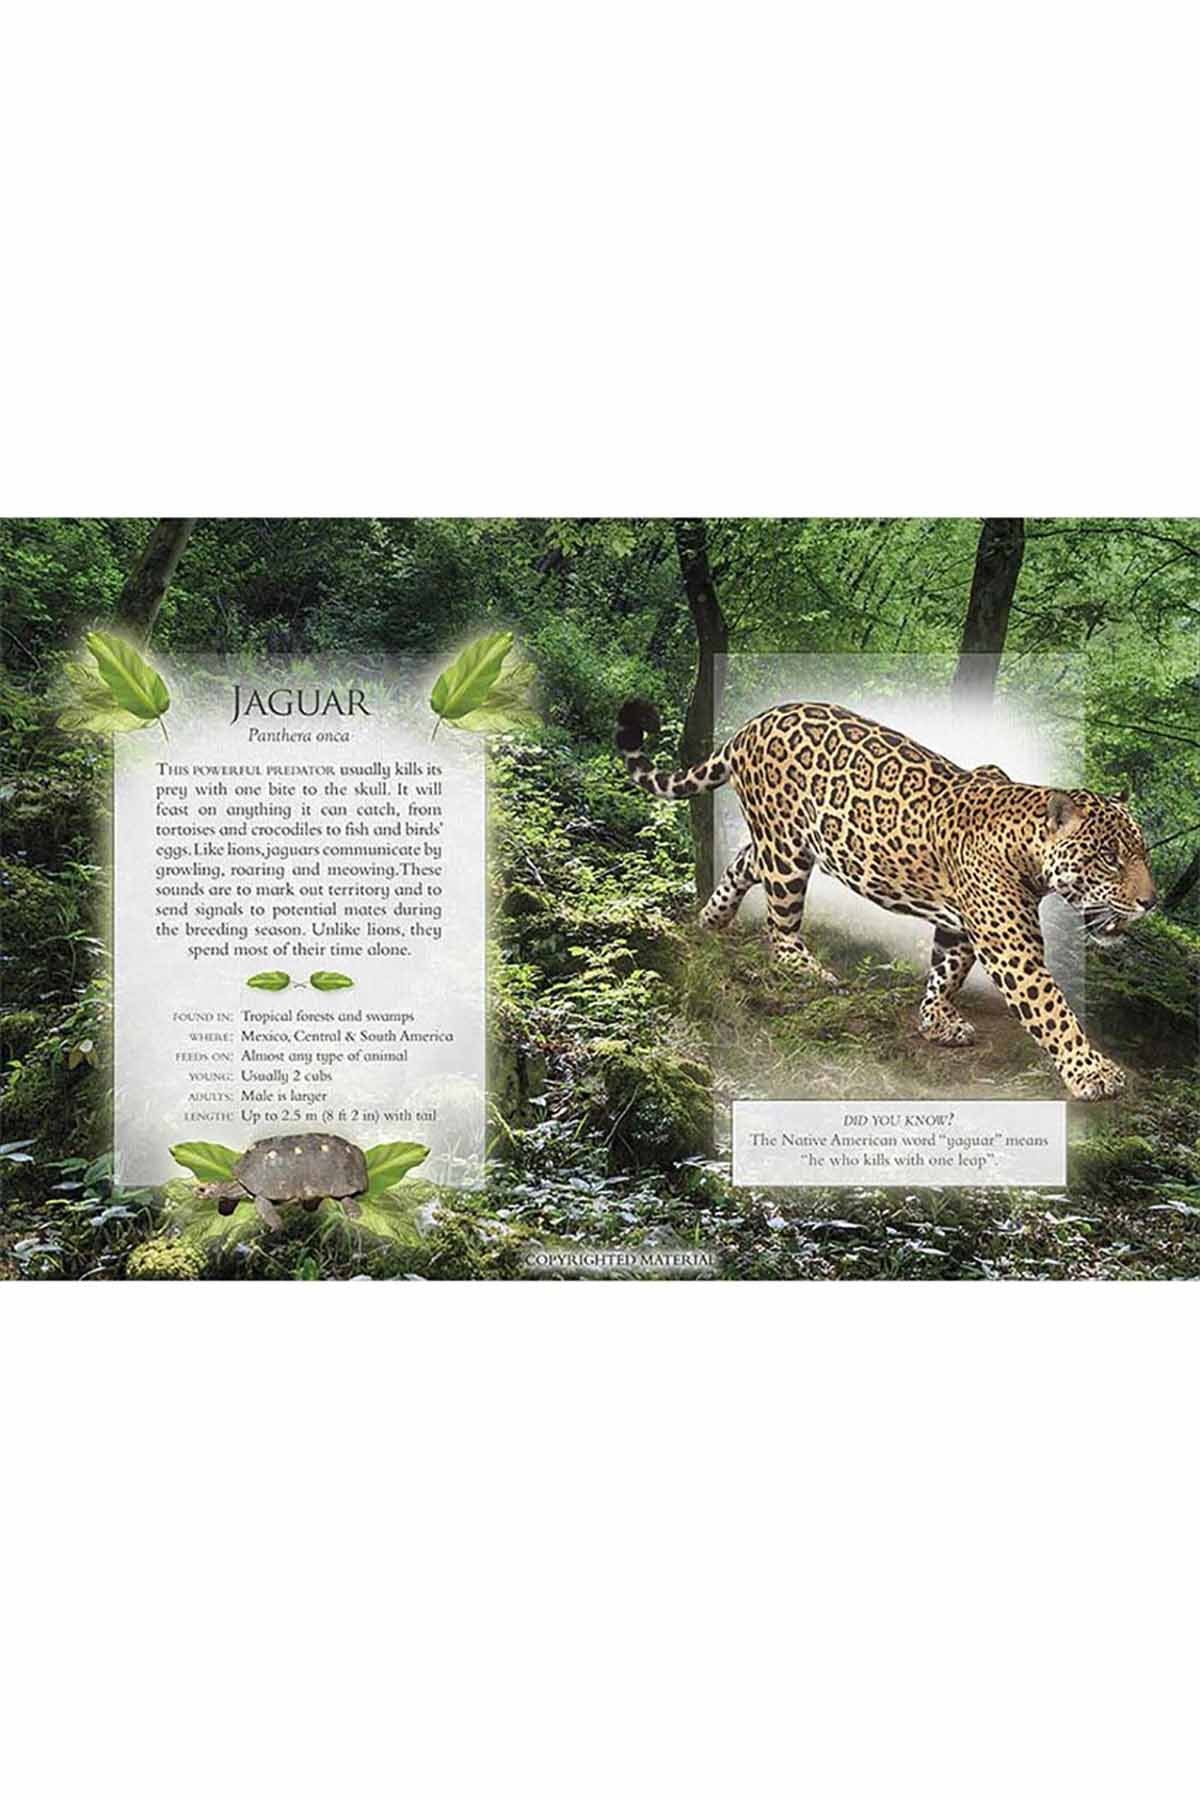 Copyrighted Material Little Book of Rainforest Animal Sounds